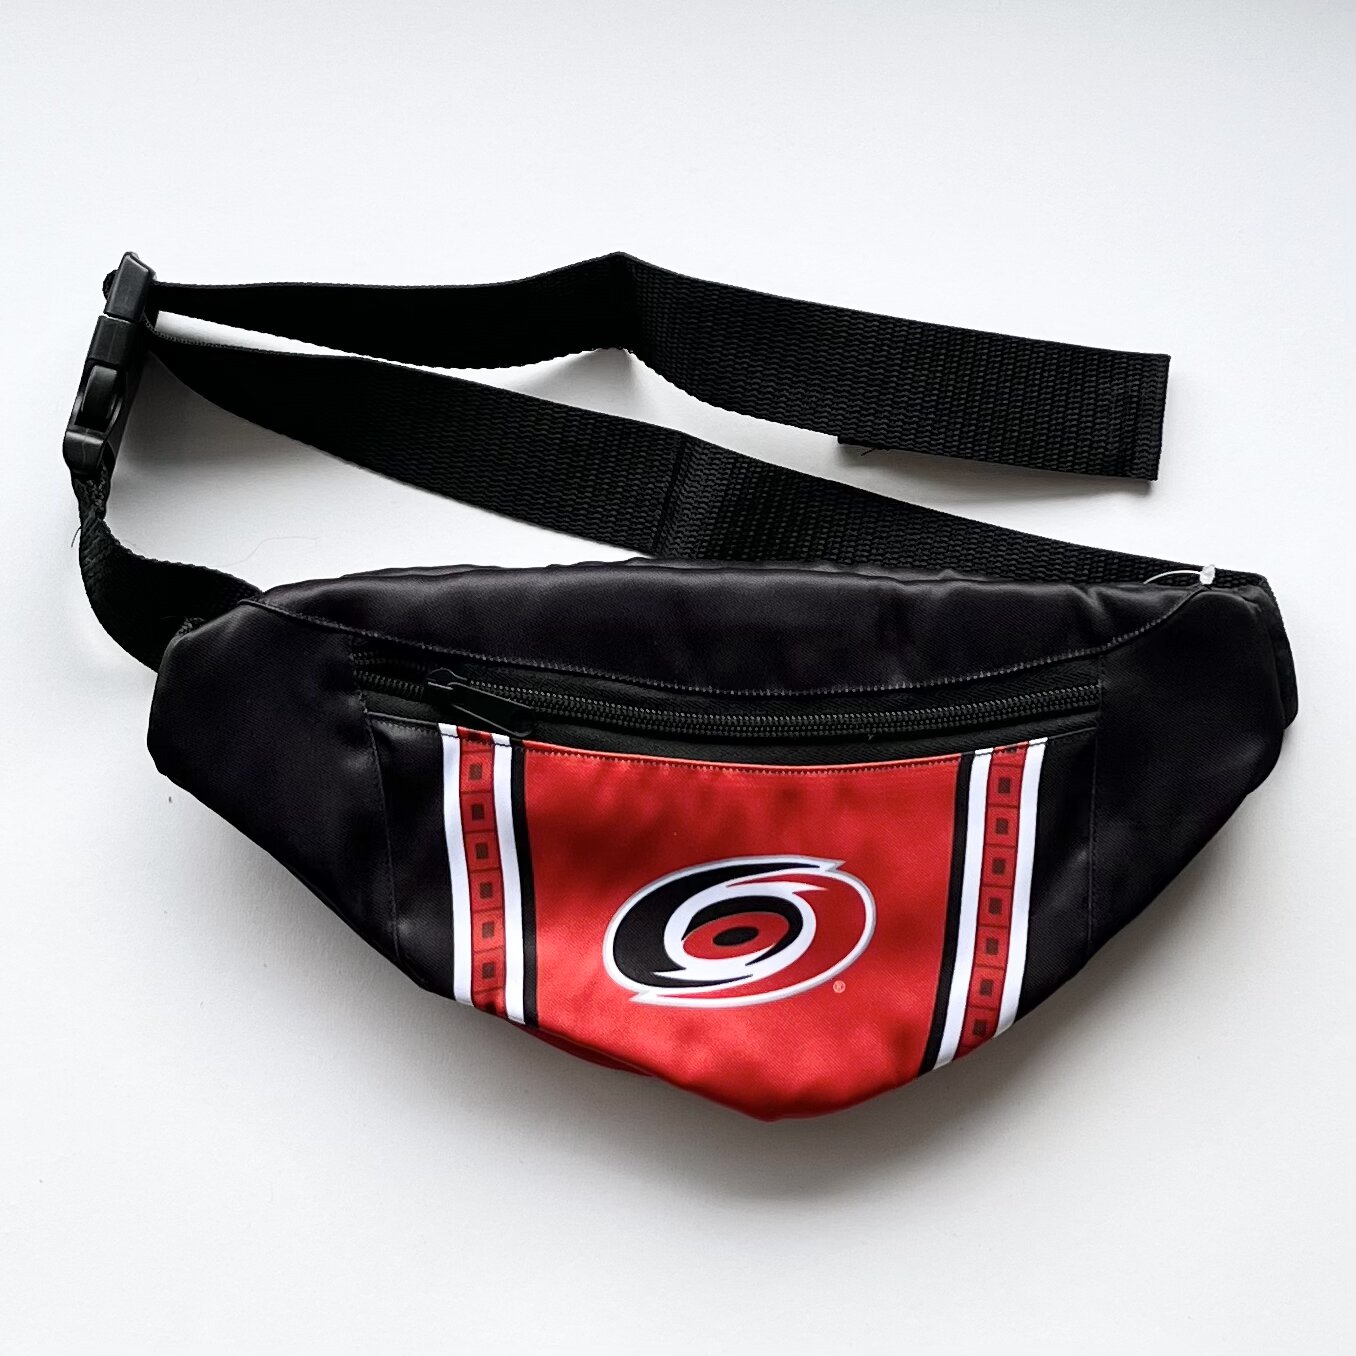 Officially Licensed NHL Fanny Pack - Carolina Hurricanes